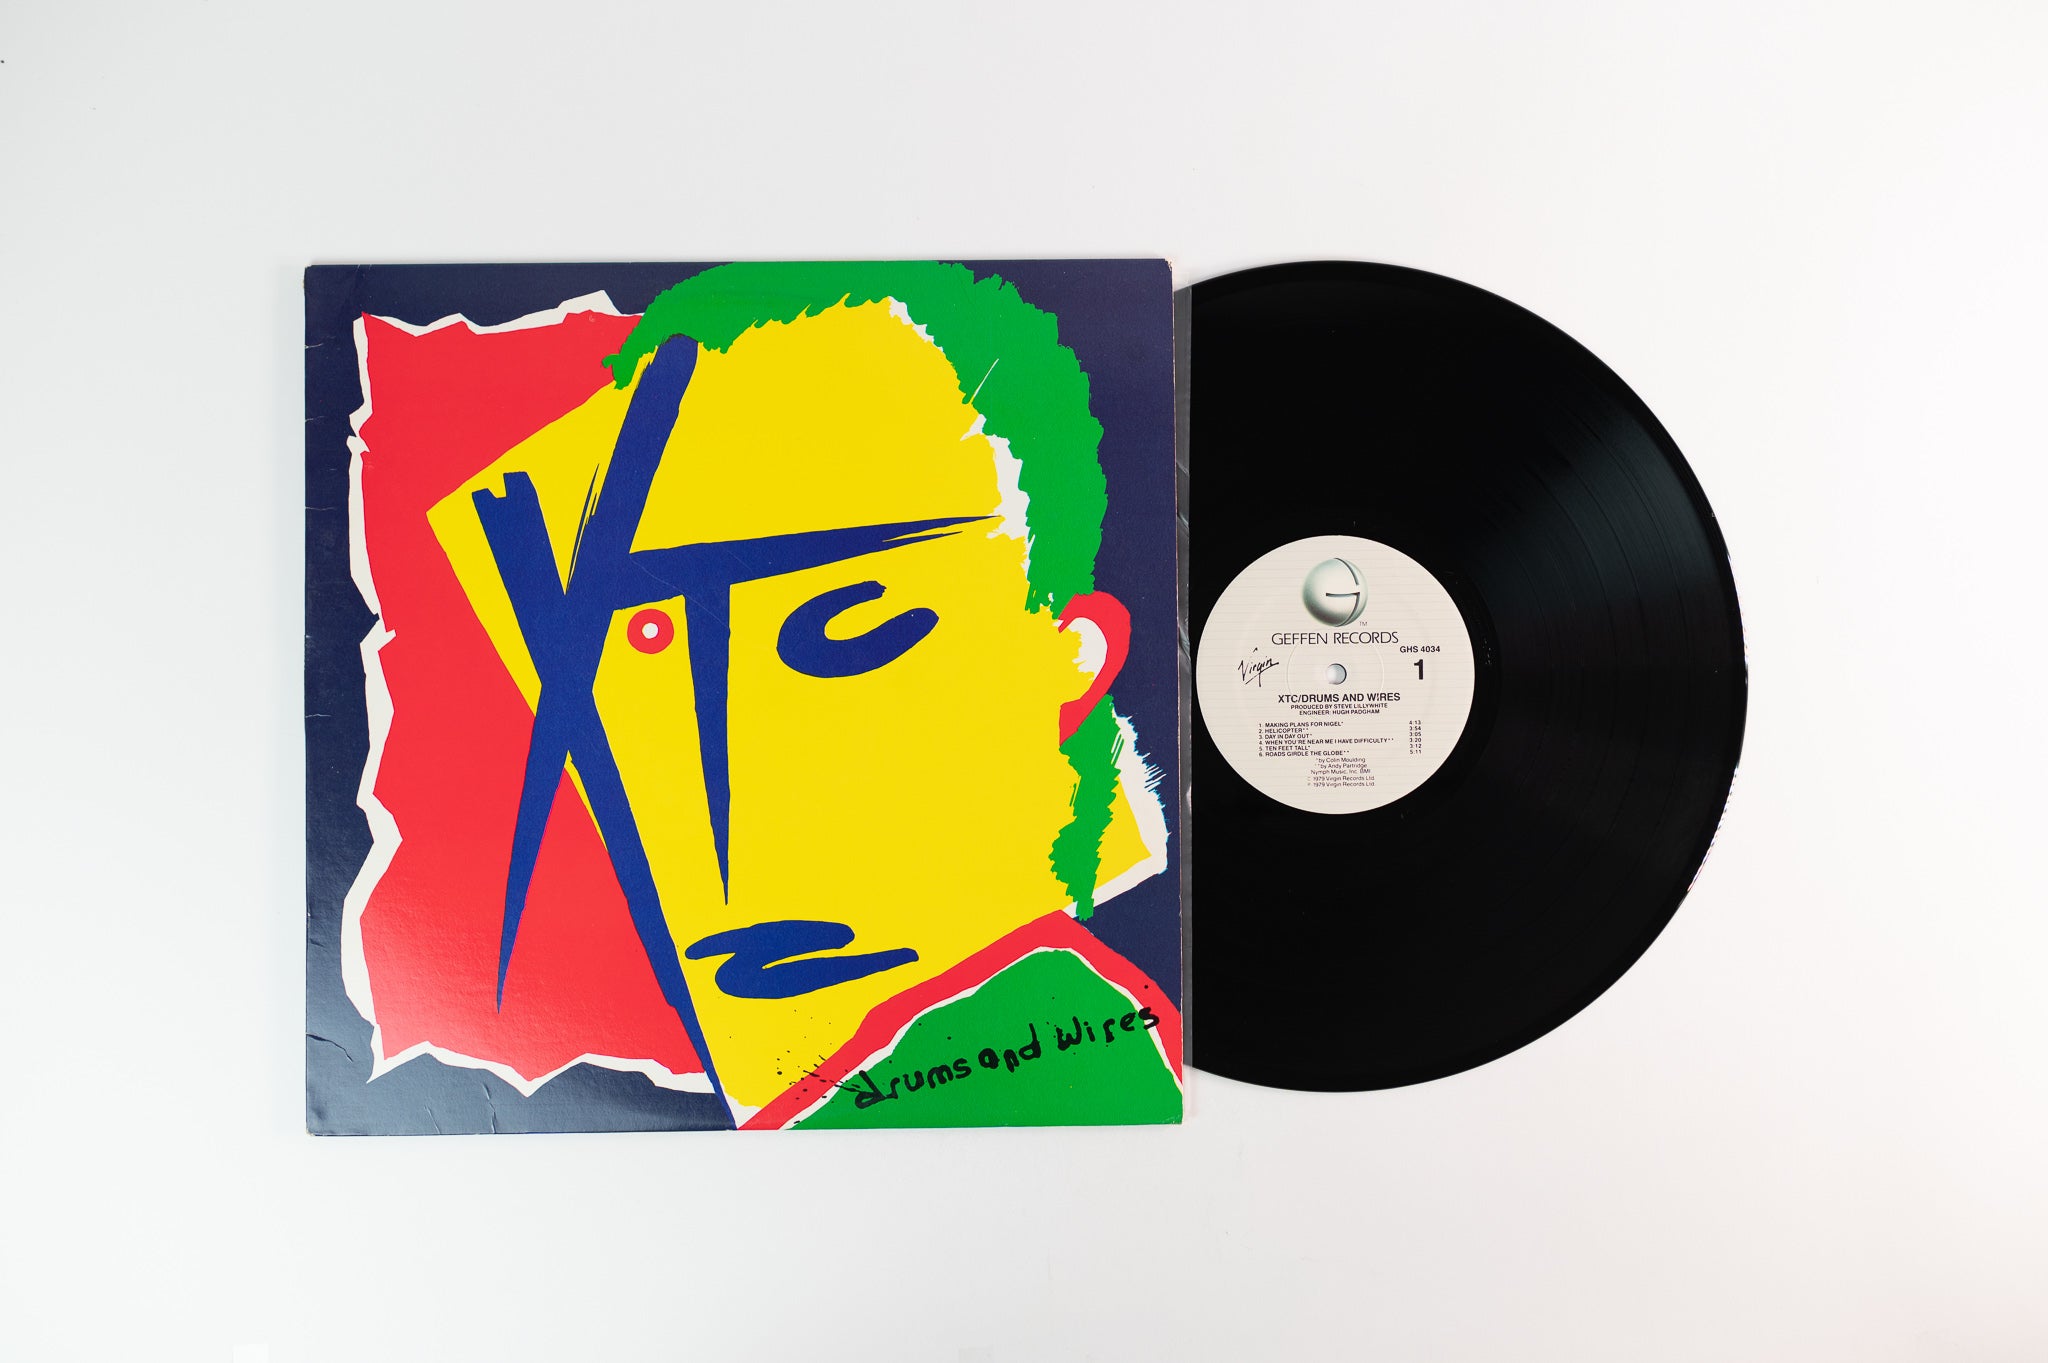 XTC - Drums And Wires on Geffen Records